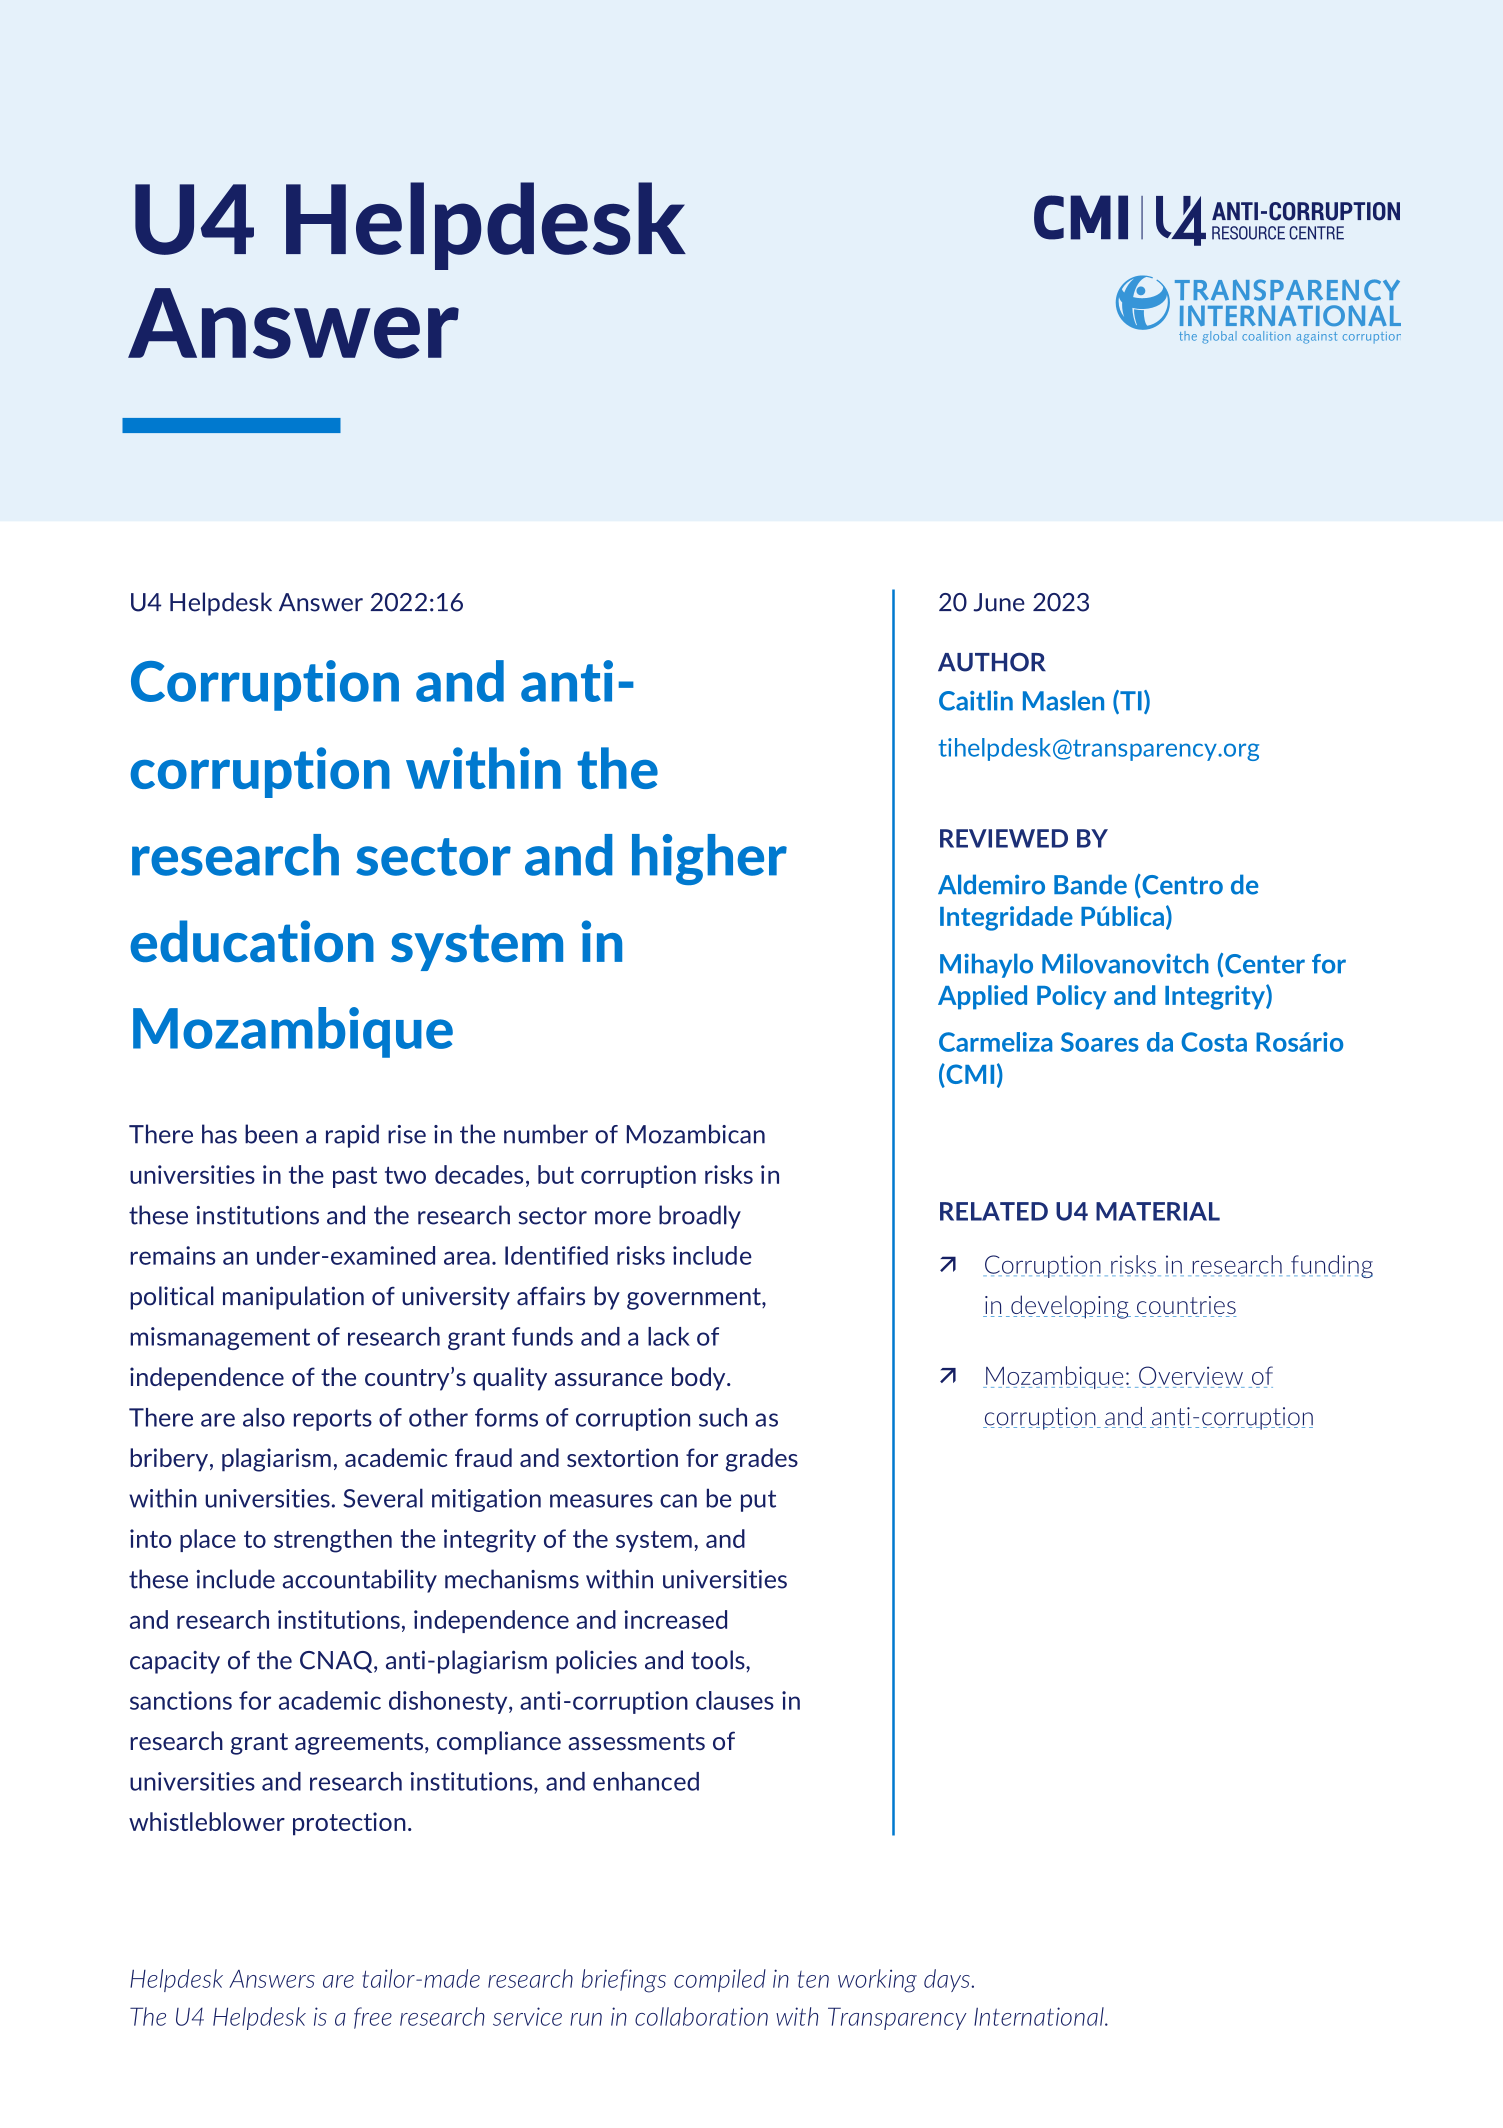 Mozambique: Corruption and anti-corruption within the research sector and higher education system